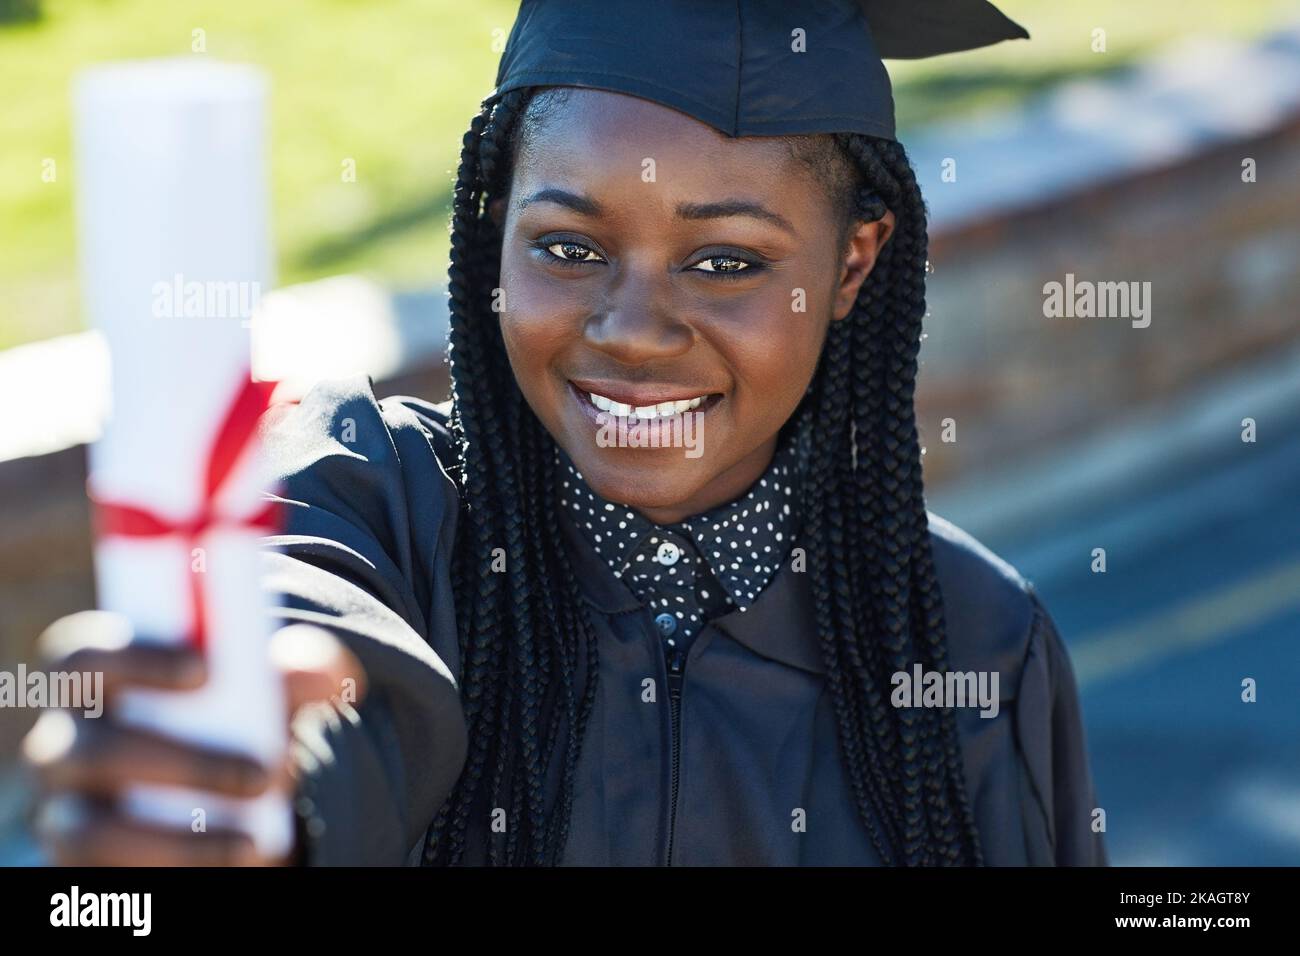 Guess who just graduated. Portrait of a young student holding her diploma on graduation day. Stock Photo